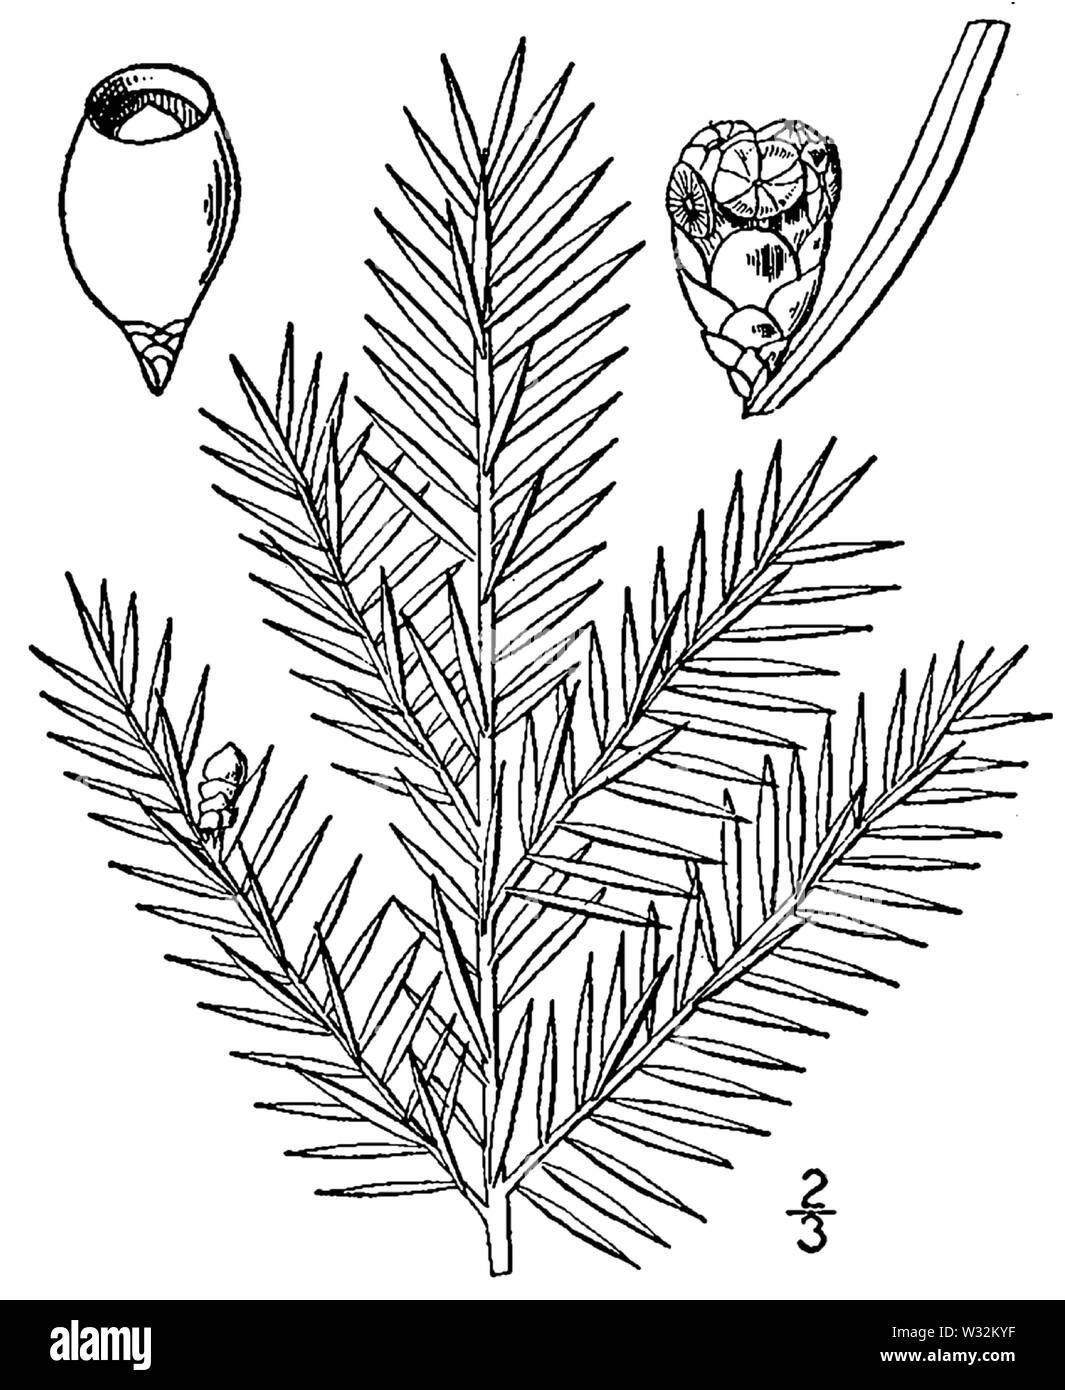 Taxus canadensis drawing Stock Photo